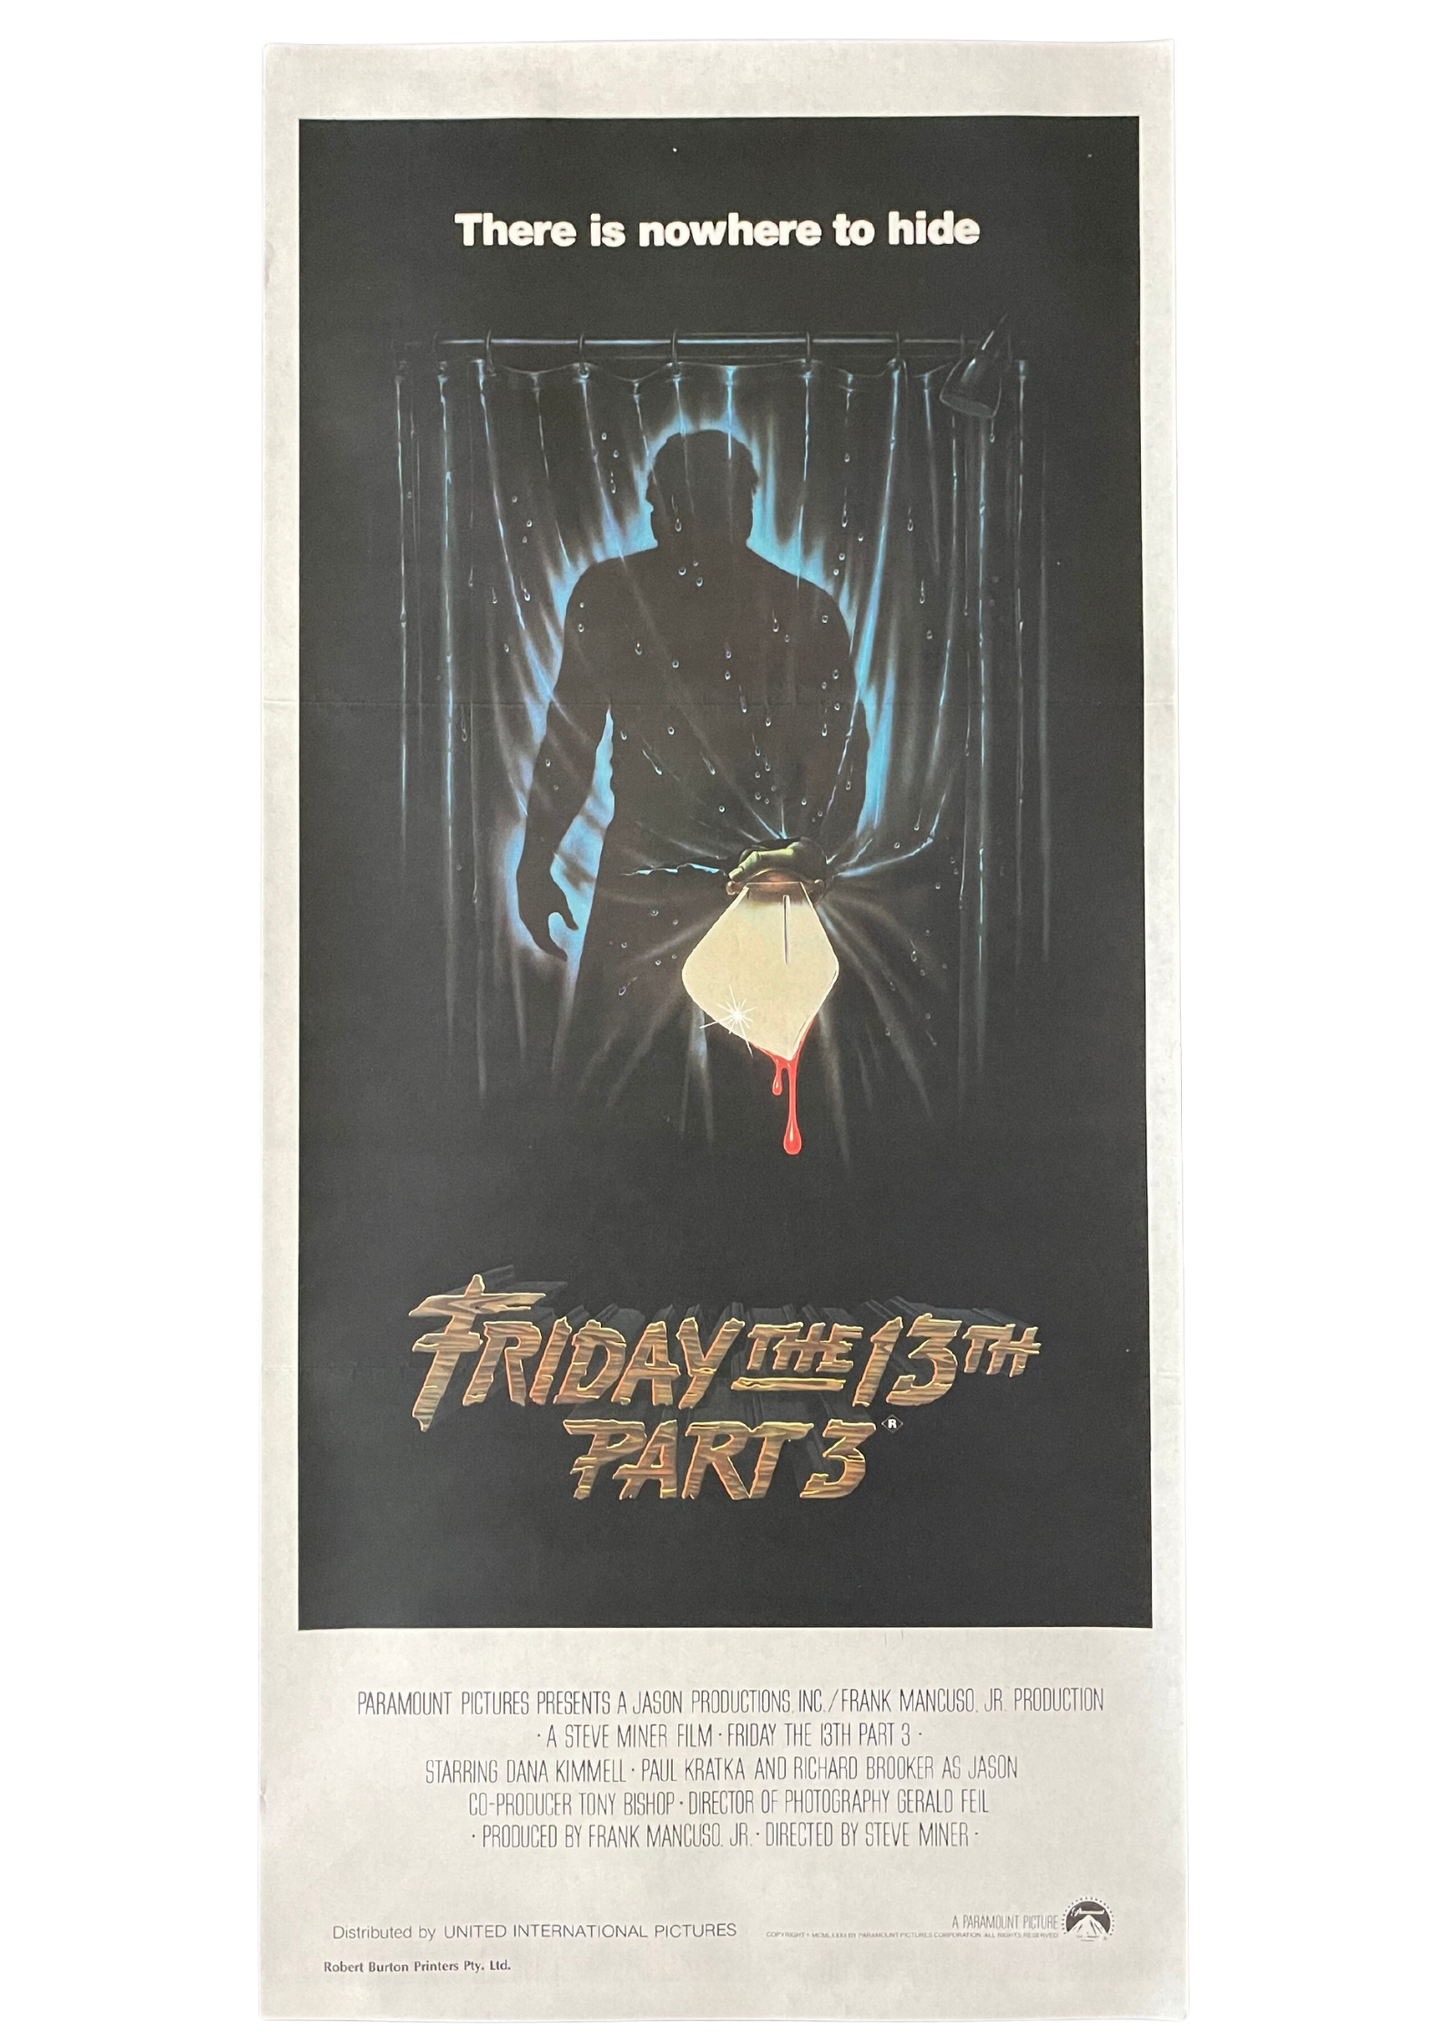 Friday The 13th Part III (1982) - Daybill